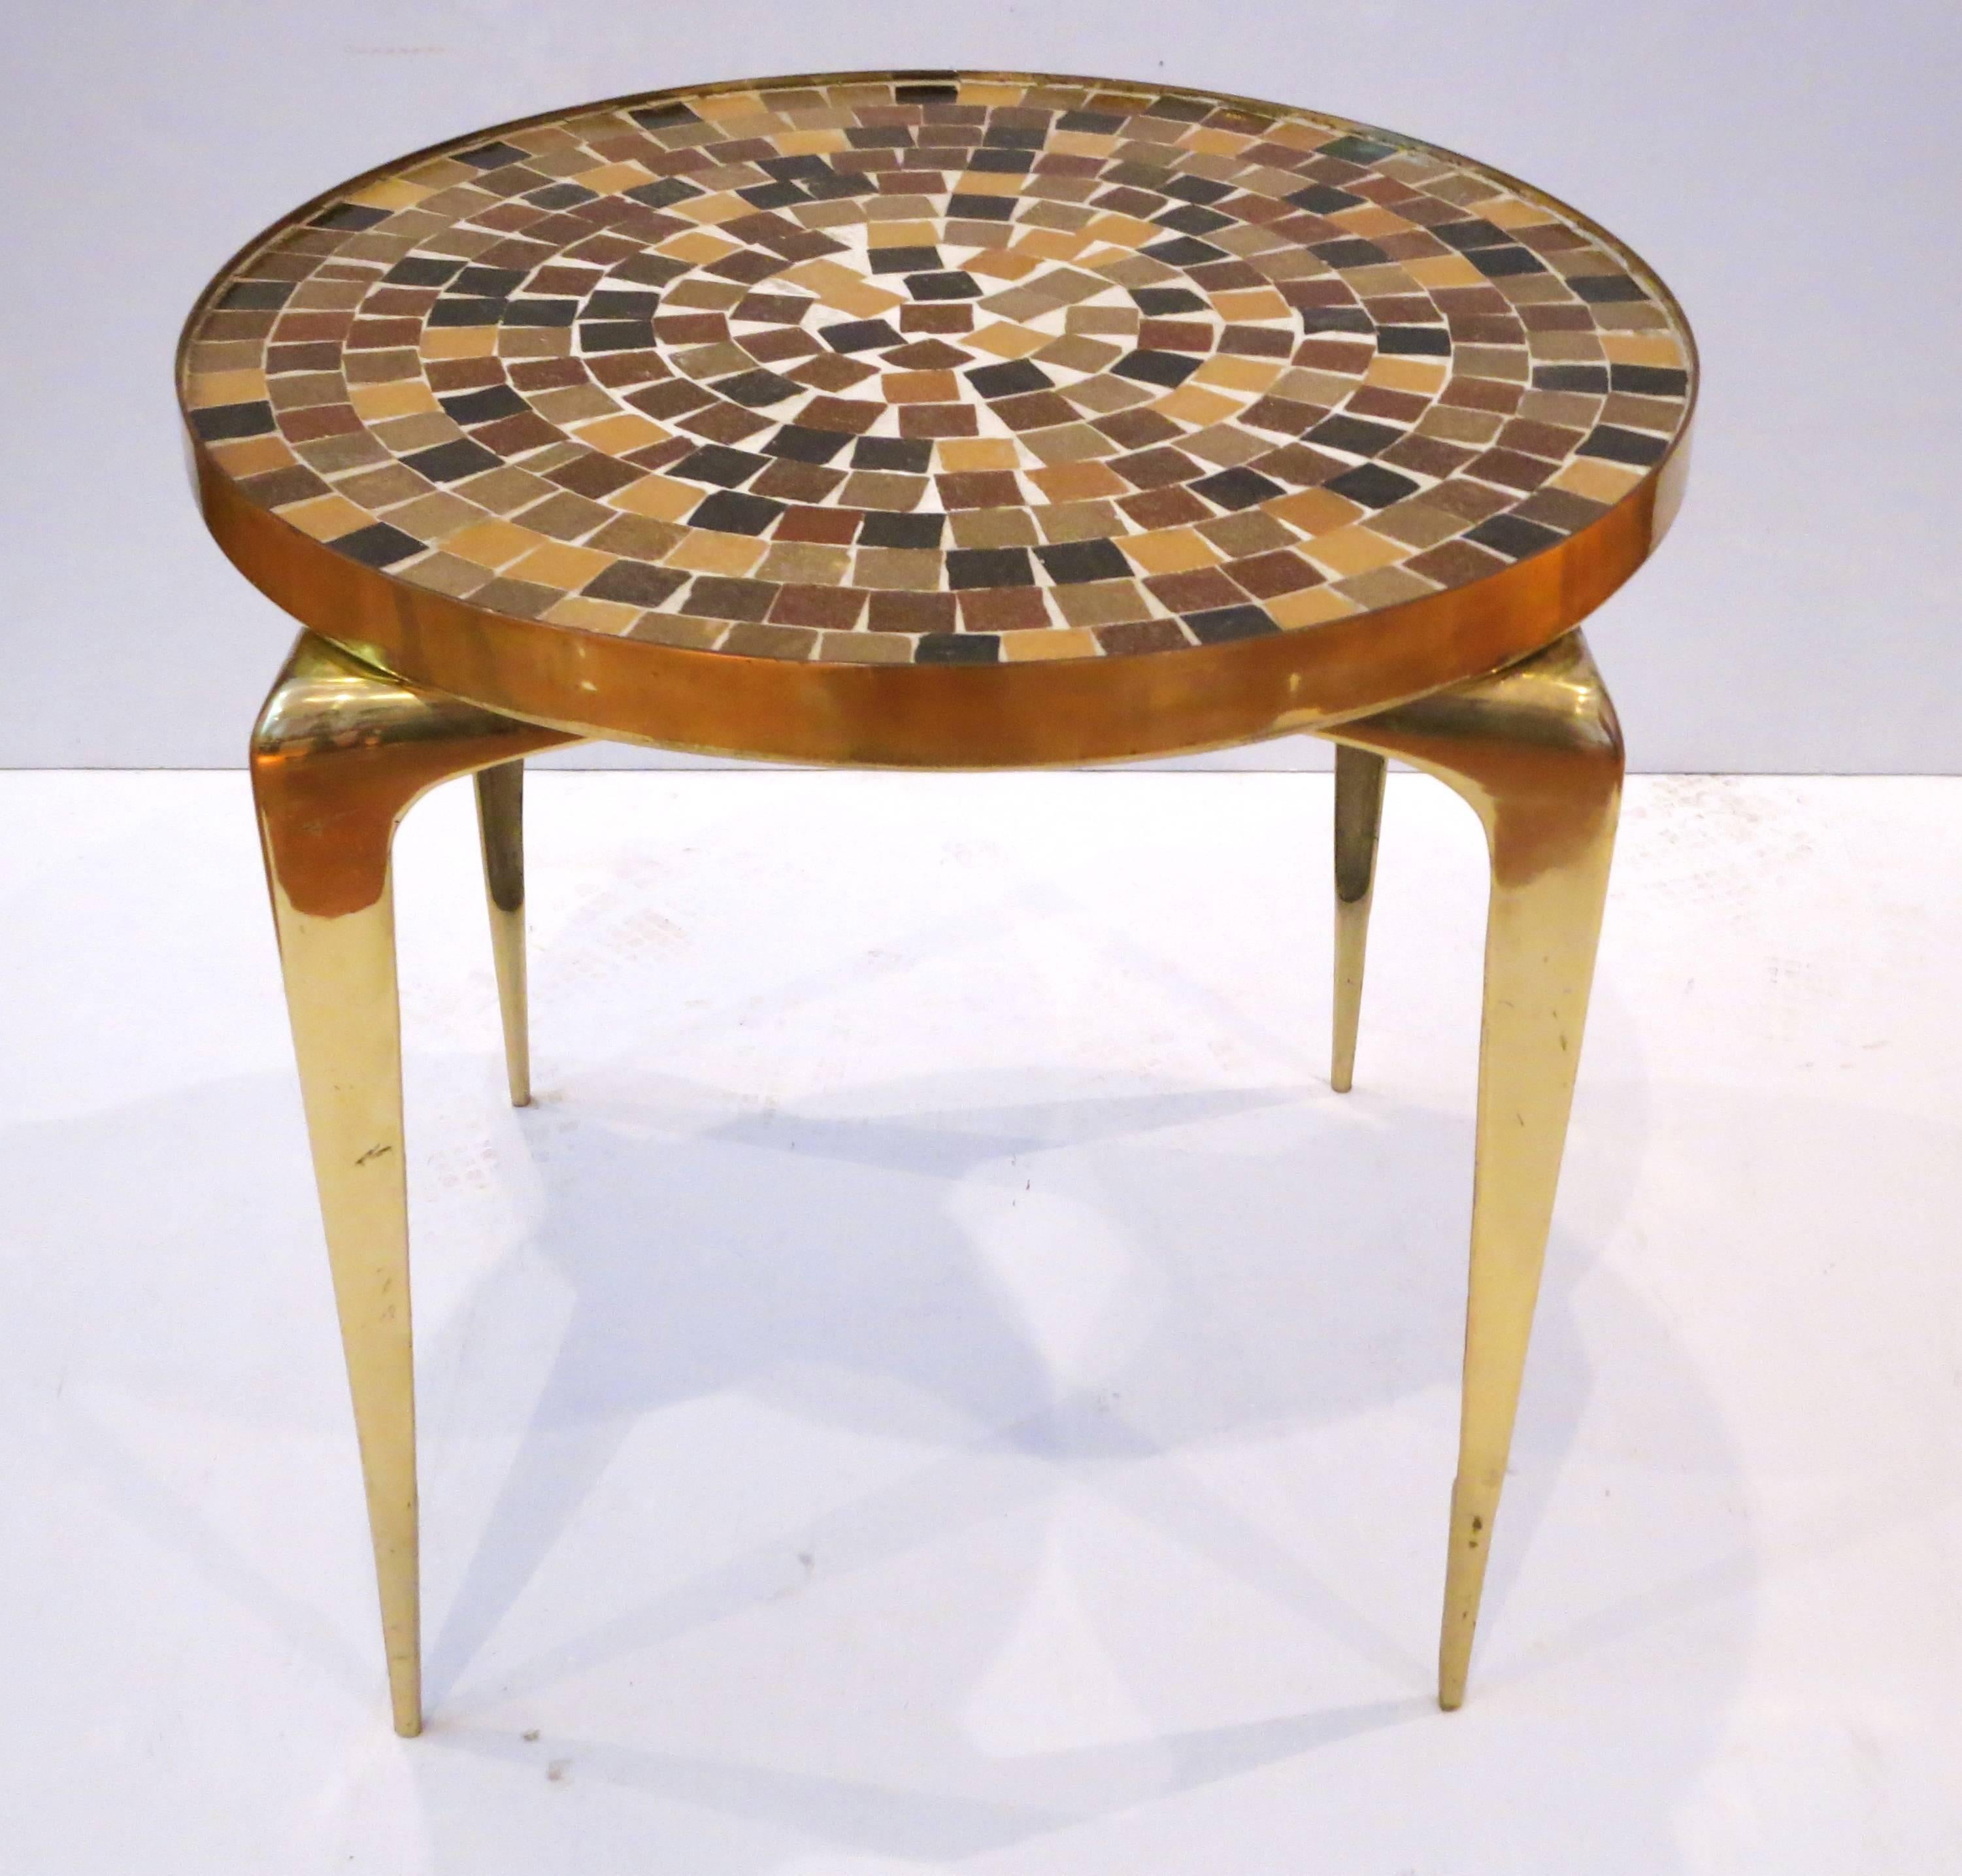 Simple elegant small round cocktail end/side table, circa 1950s solid polished brass edge ring and multicolored tile top in the style of Gio Ponti, beautiful solid brass sculpted legs solid and sturdy.